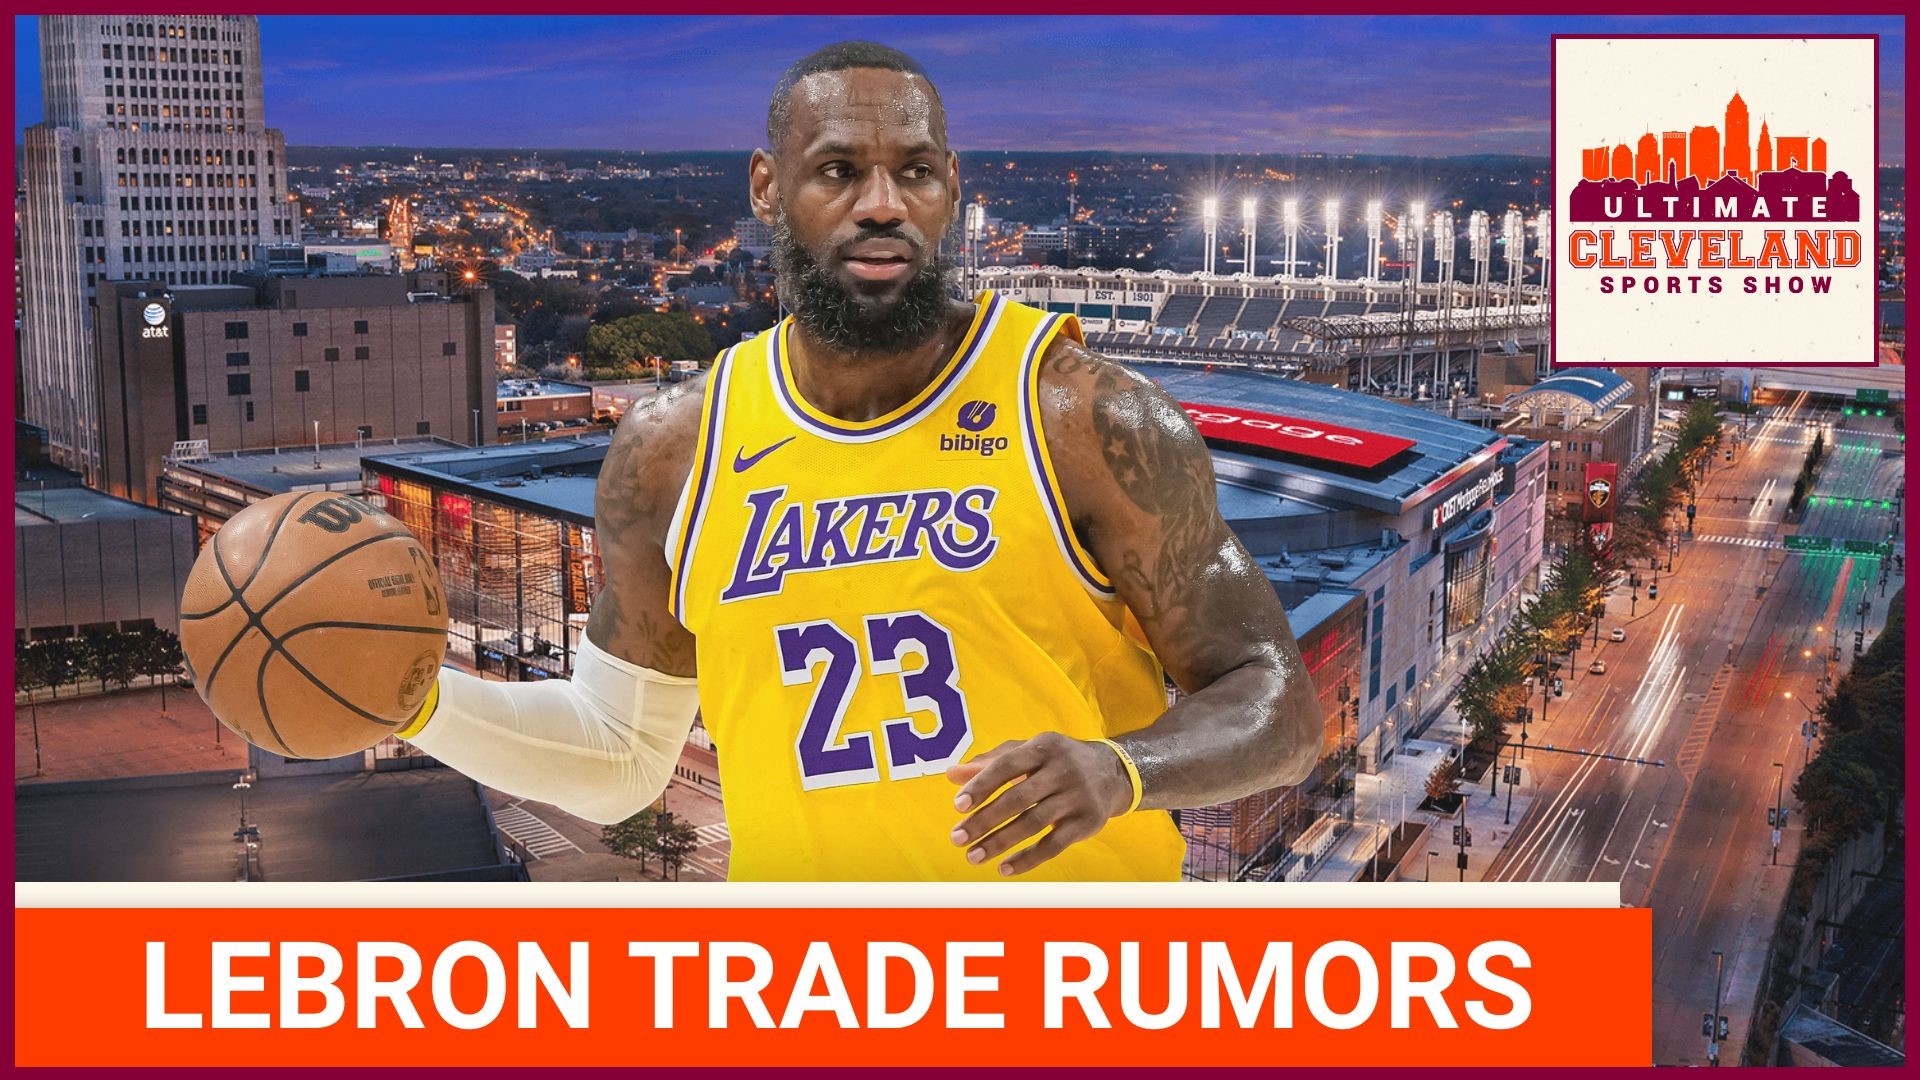 Lebron James' agent says Lebron James will not be traded away from the Lakers before the NBA's trade deadline.